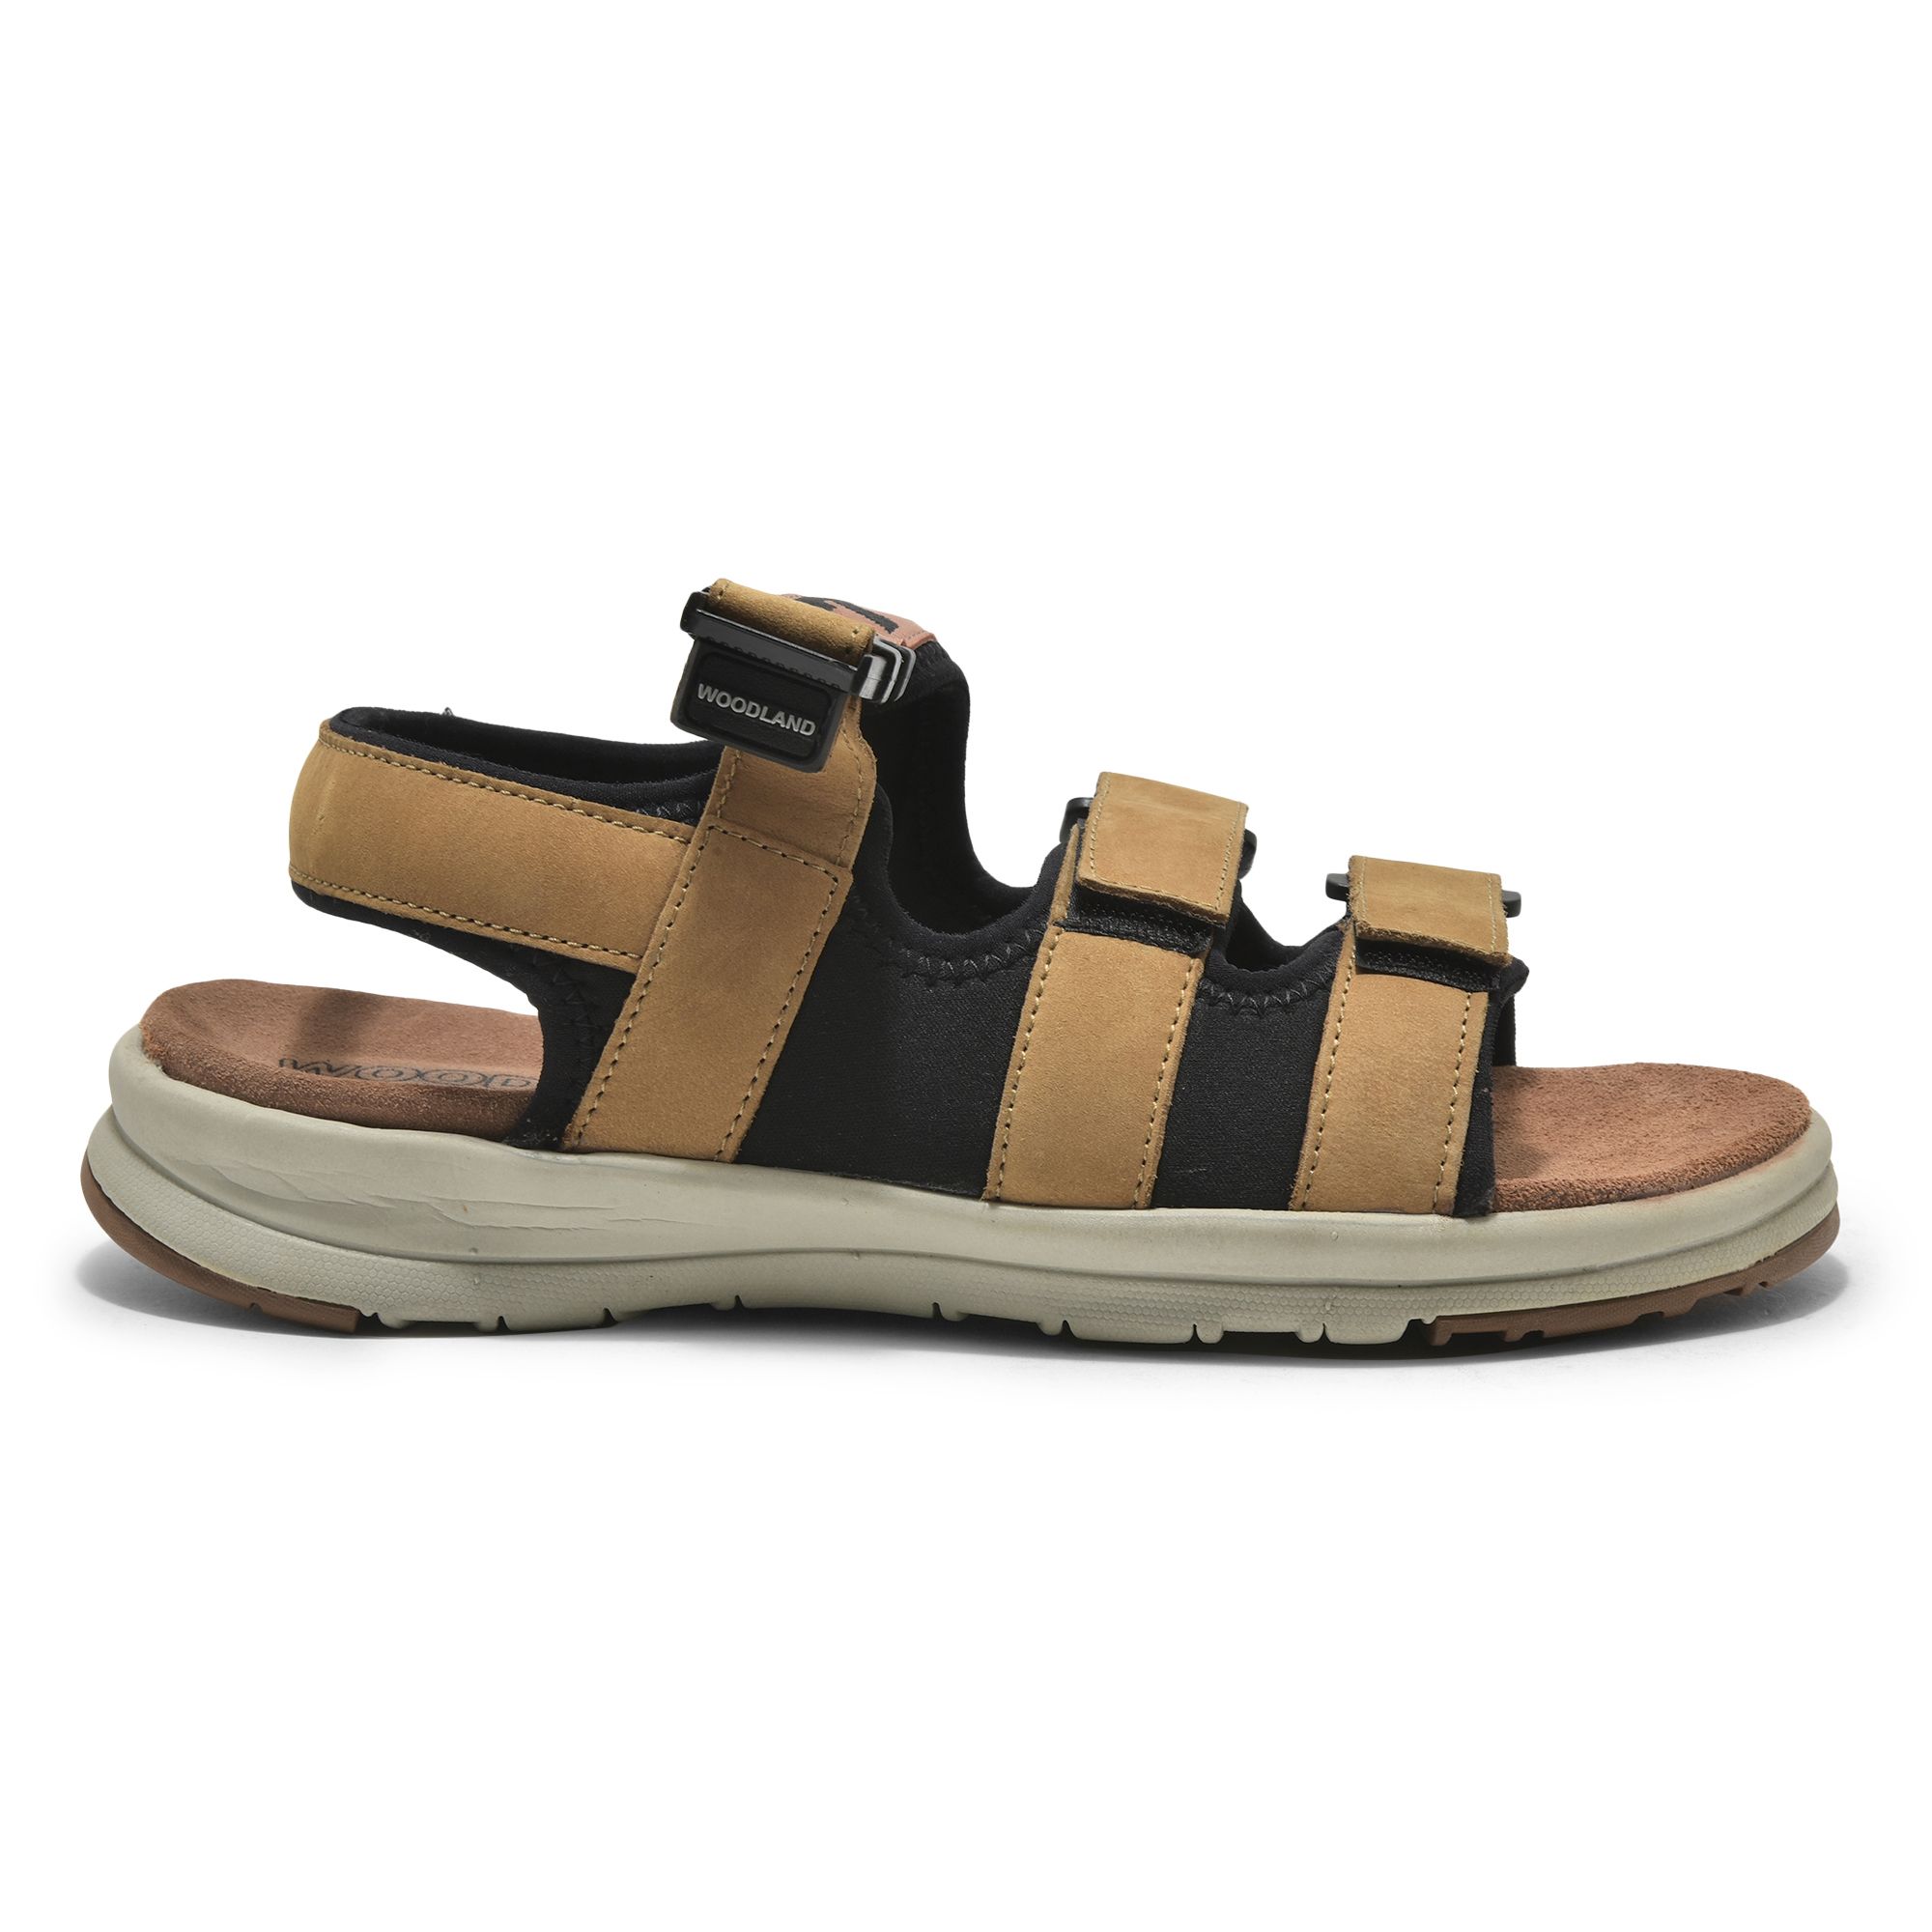 WOODLAND CAMEL SANDAL- FOR MEN in Malappuram at best price by Foot Xpress -  Justdial